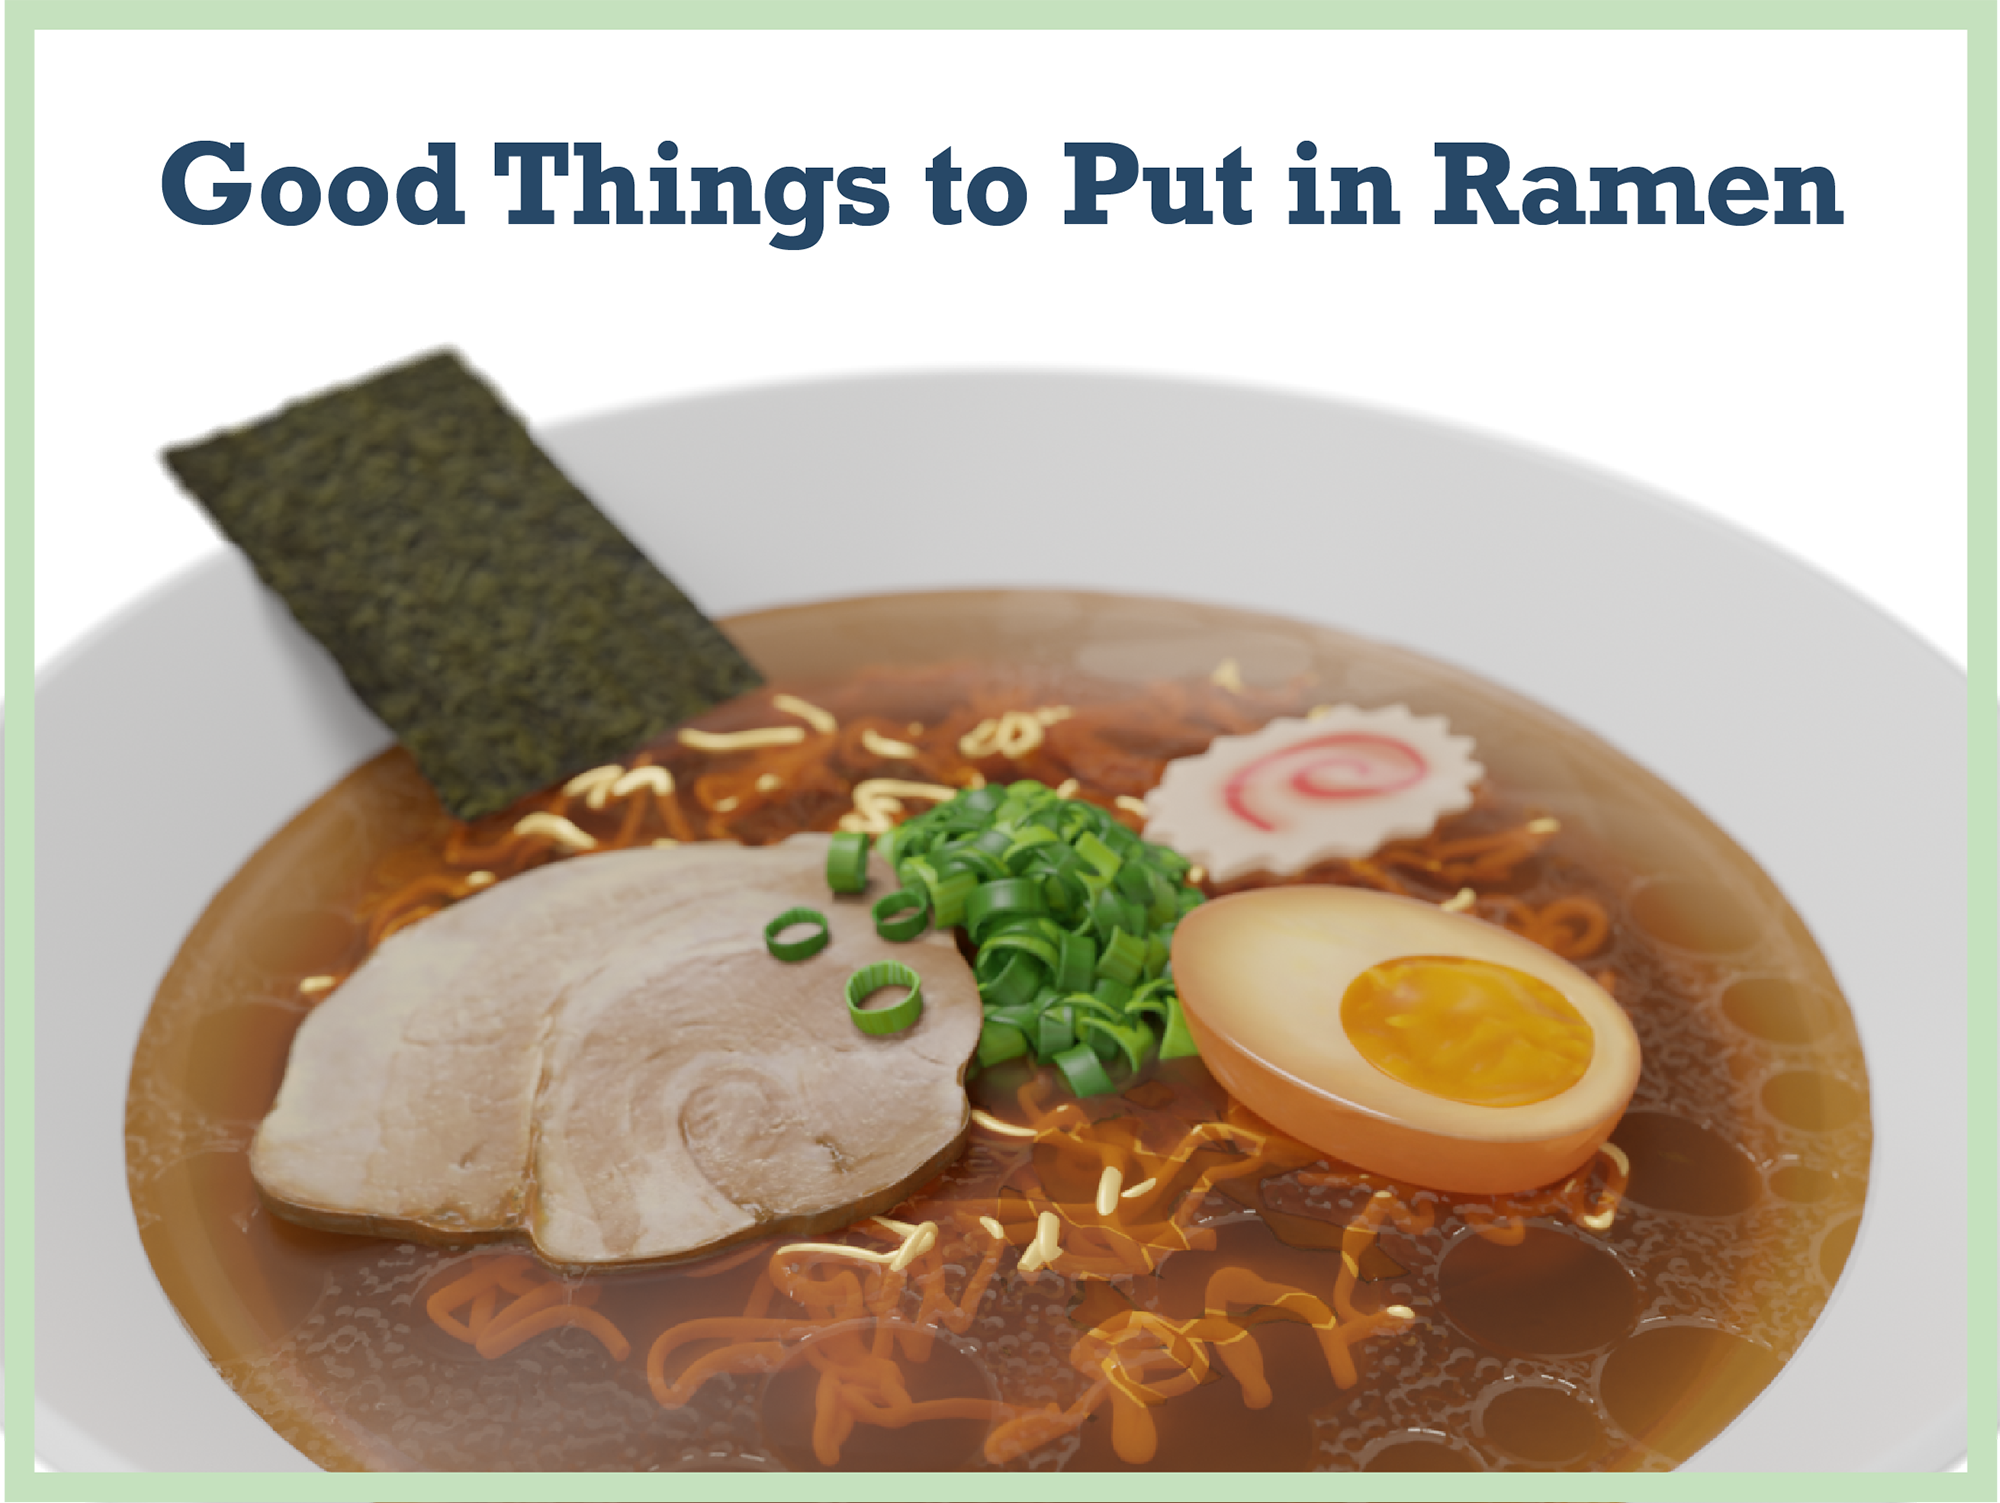 Good Things to Put in Ramen: How to Create a High Quality Bowl of Ramen